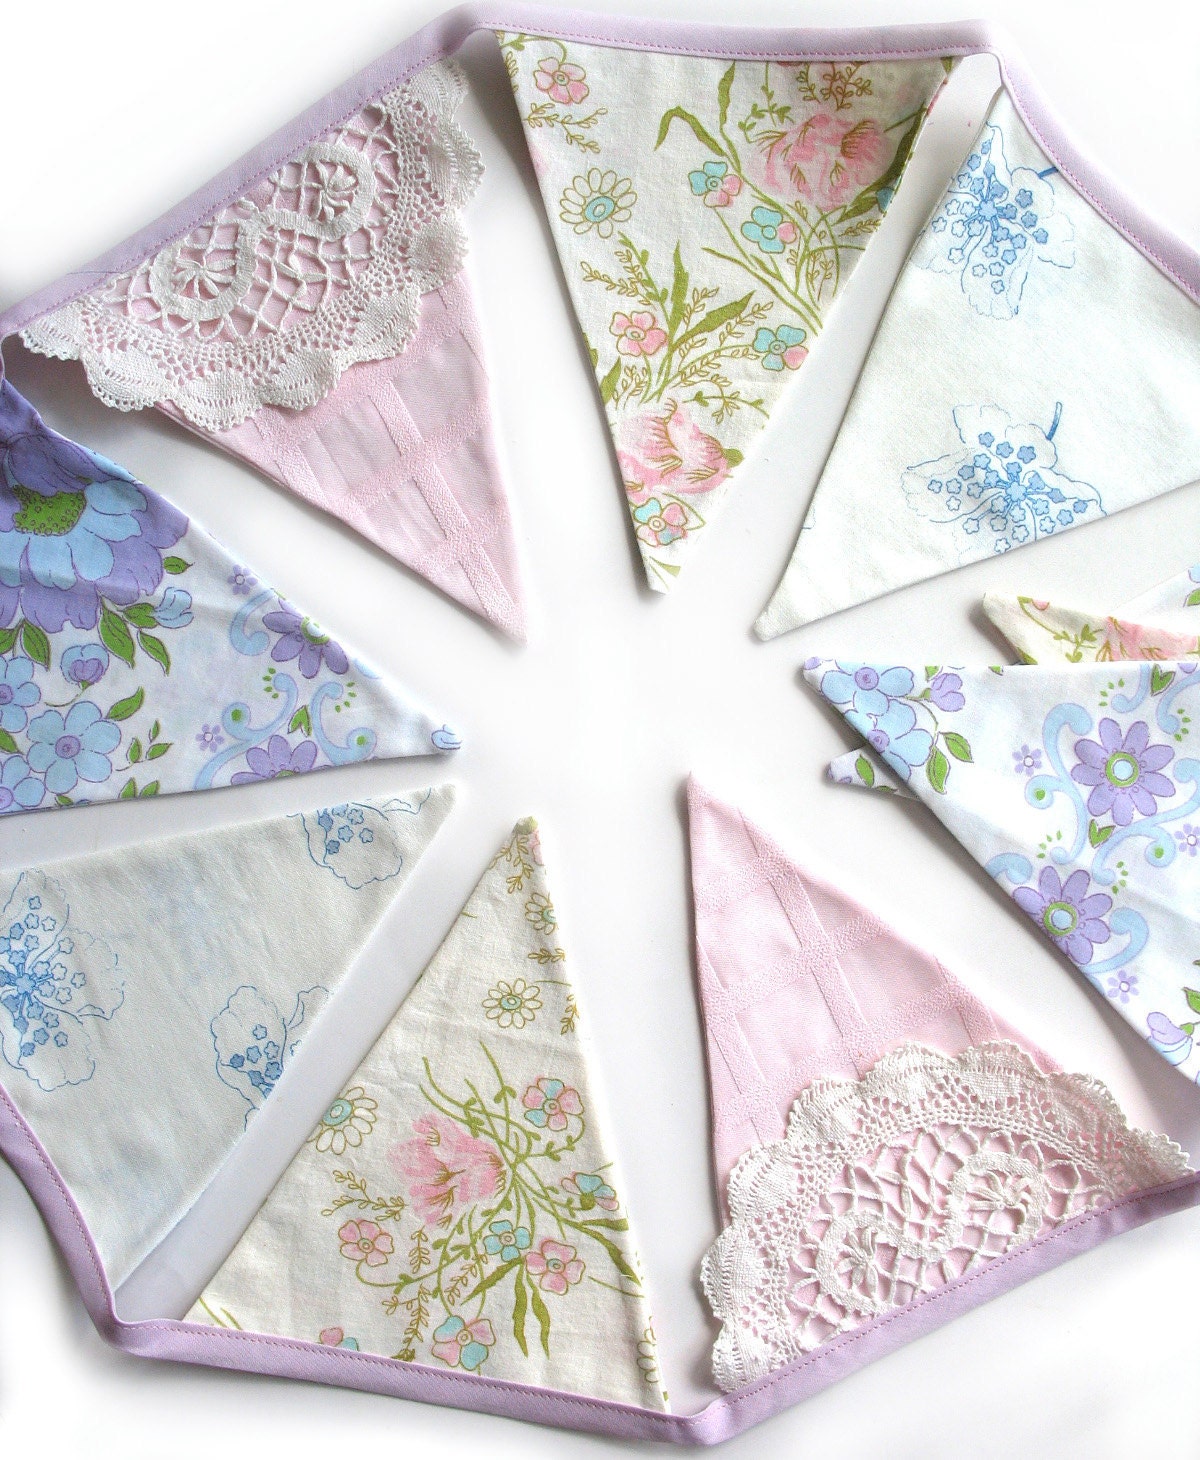 Vintage Pretty Pastel Floral Pink & Lilac Doily Lace, Floral Flag Bunting. Wall hanging, Parties, Party, Wedding etc